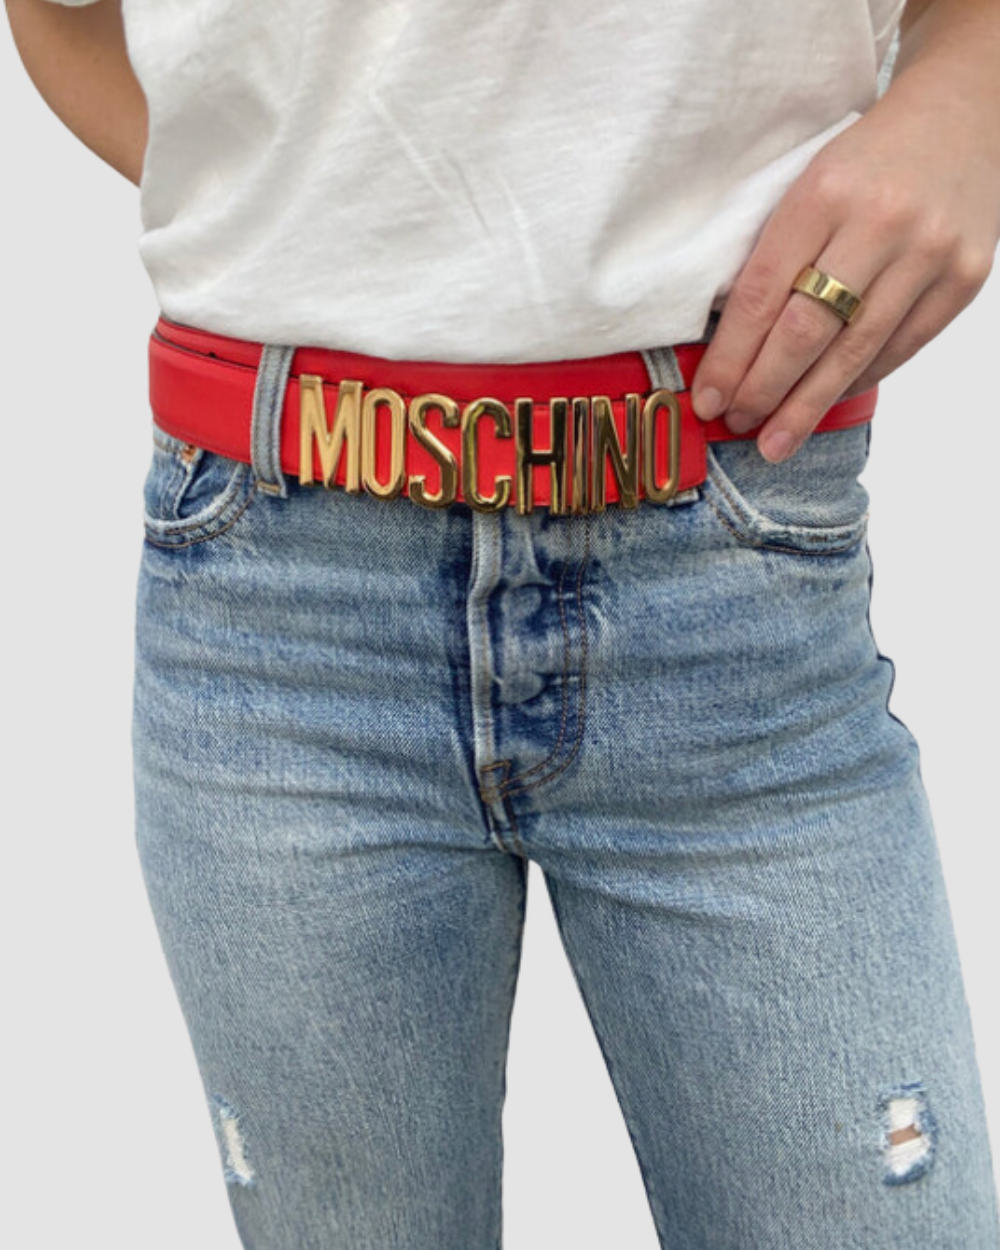 Moschino Red Gold Letter Belt